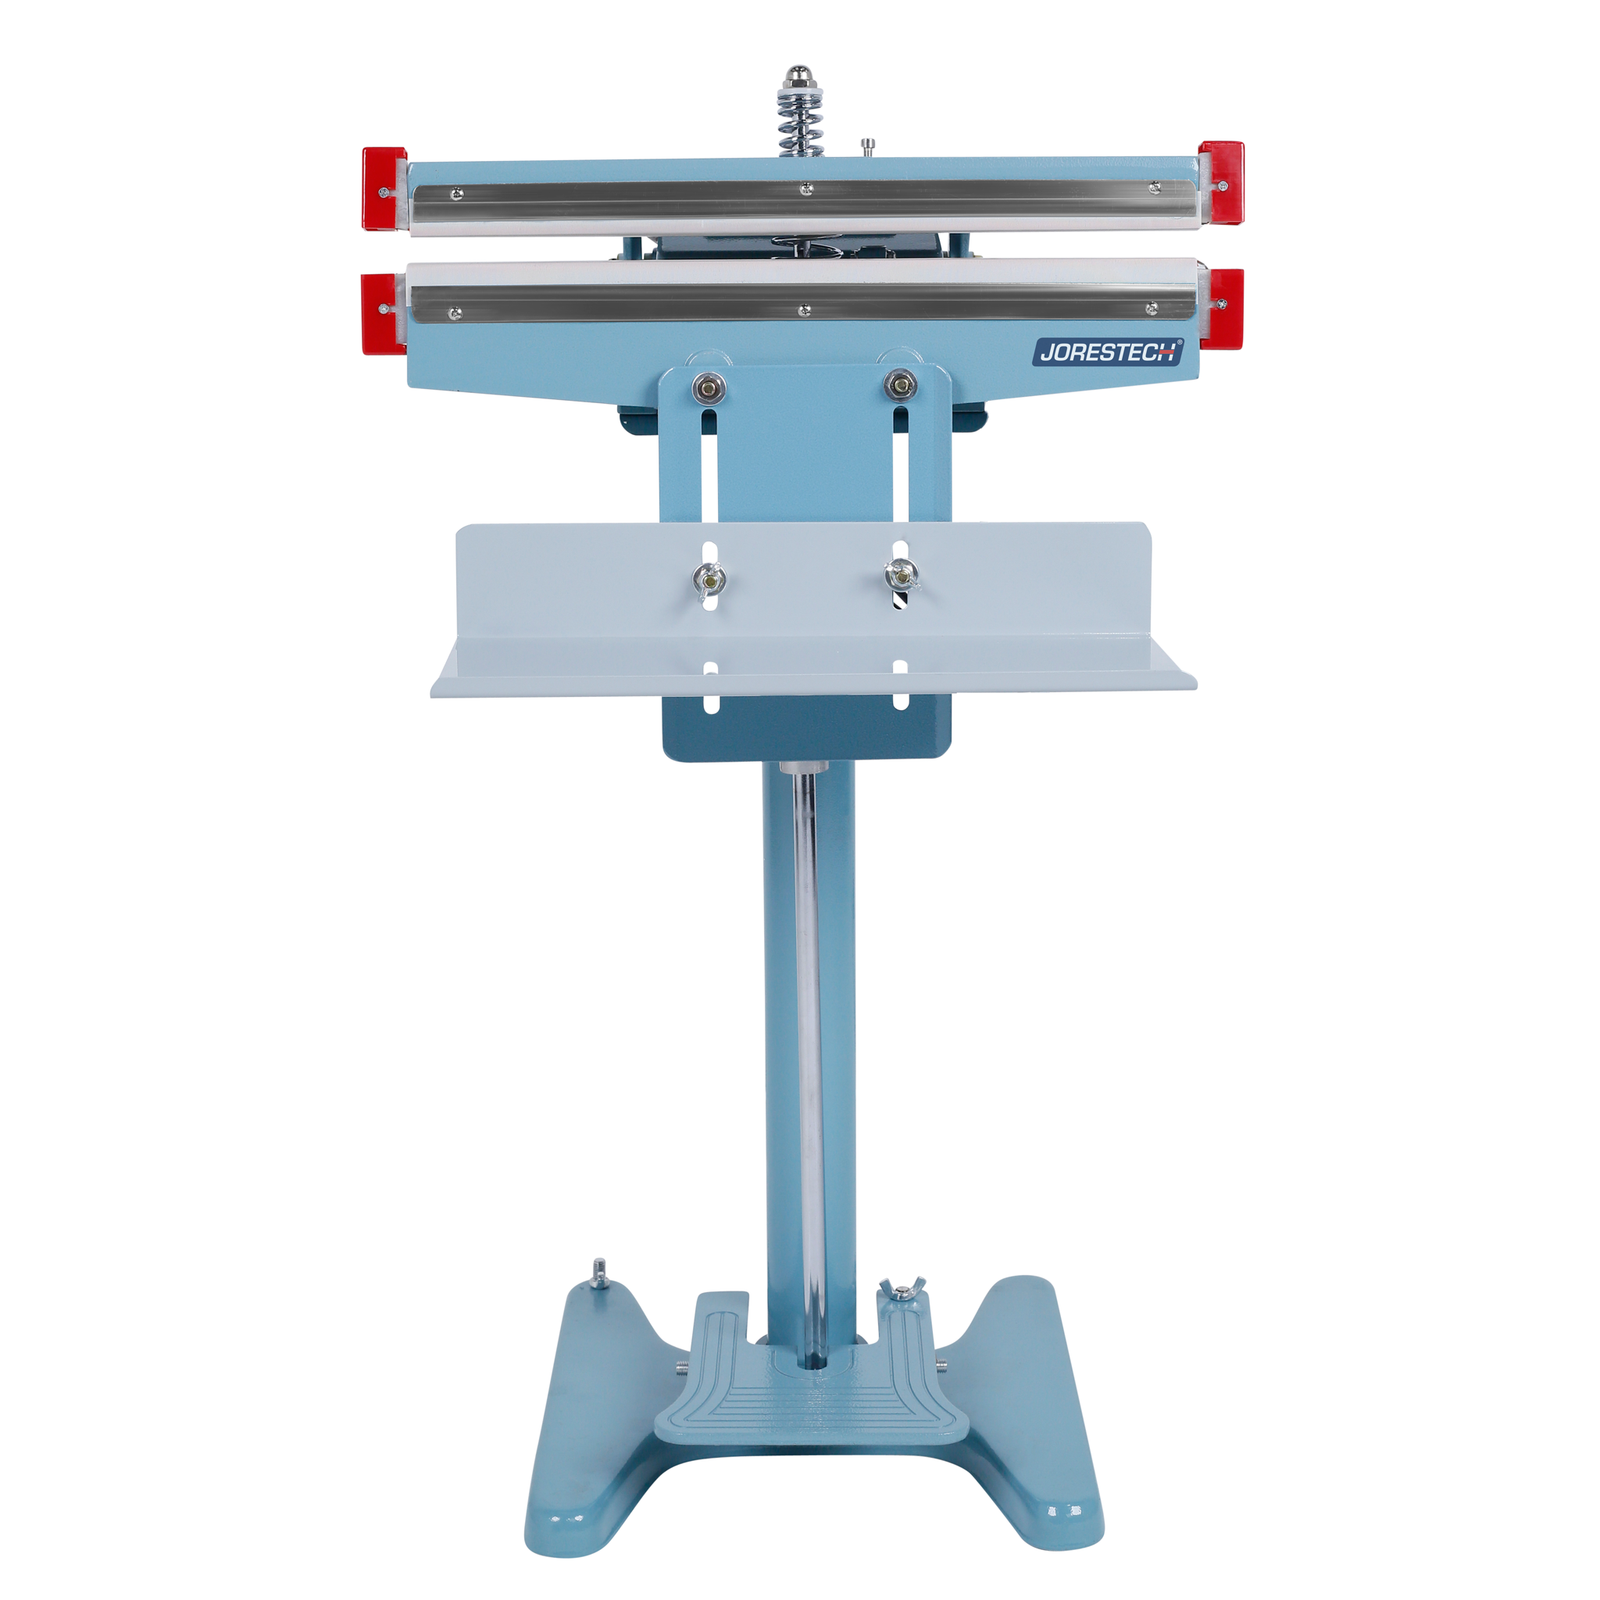 A blue foot impulse sealer over white background. Machine is shown with open double sealing jaw and JORESTECH logo.